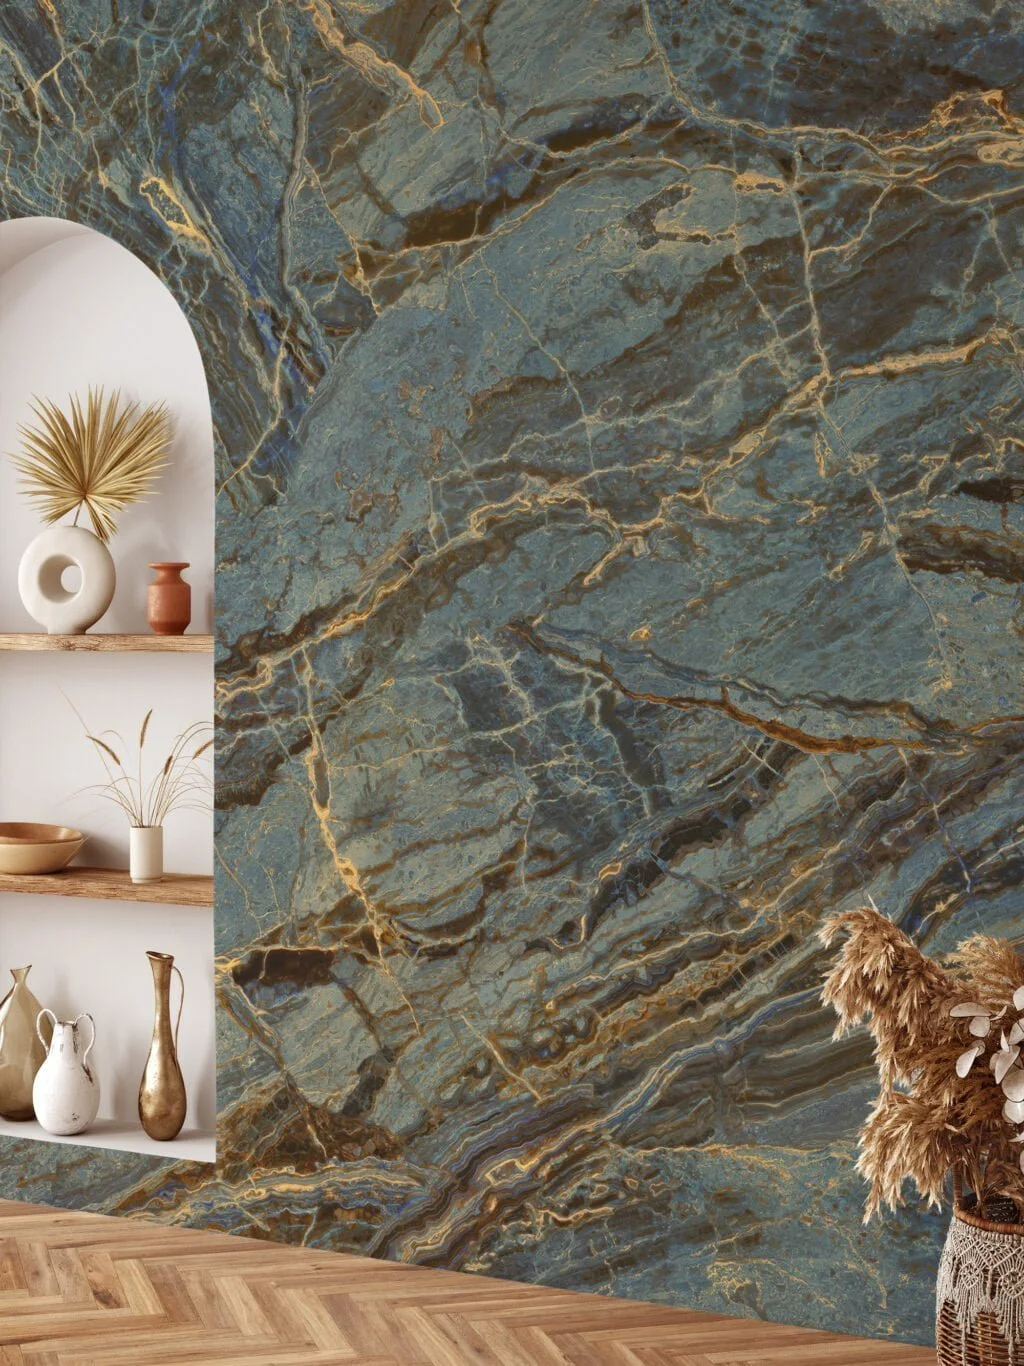 Rustic Charm with Earthy Tones Marble Texture Wallpaper, Wall Mural That Blends Natural Elements with Modern Design